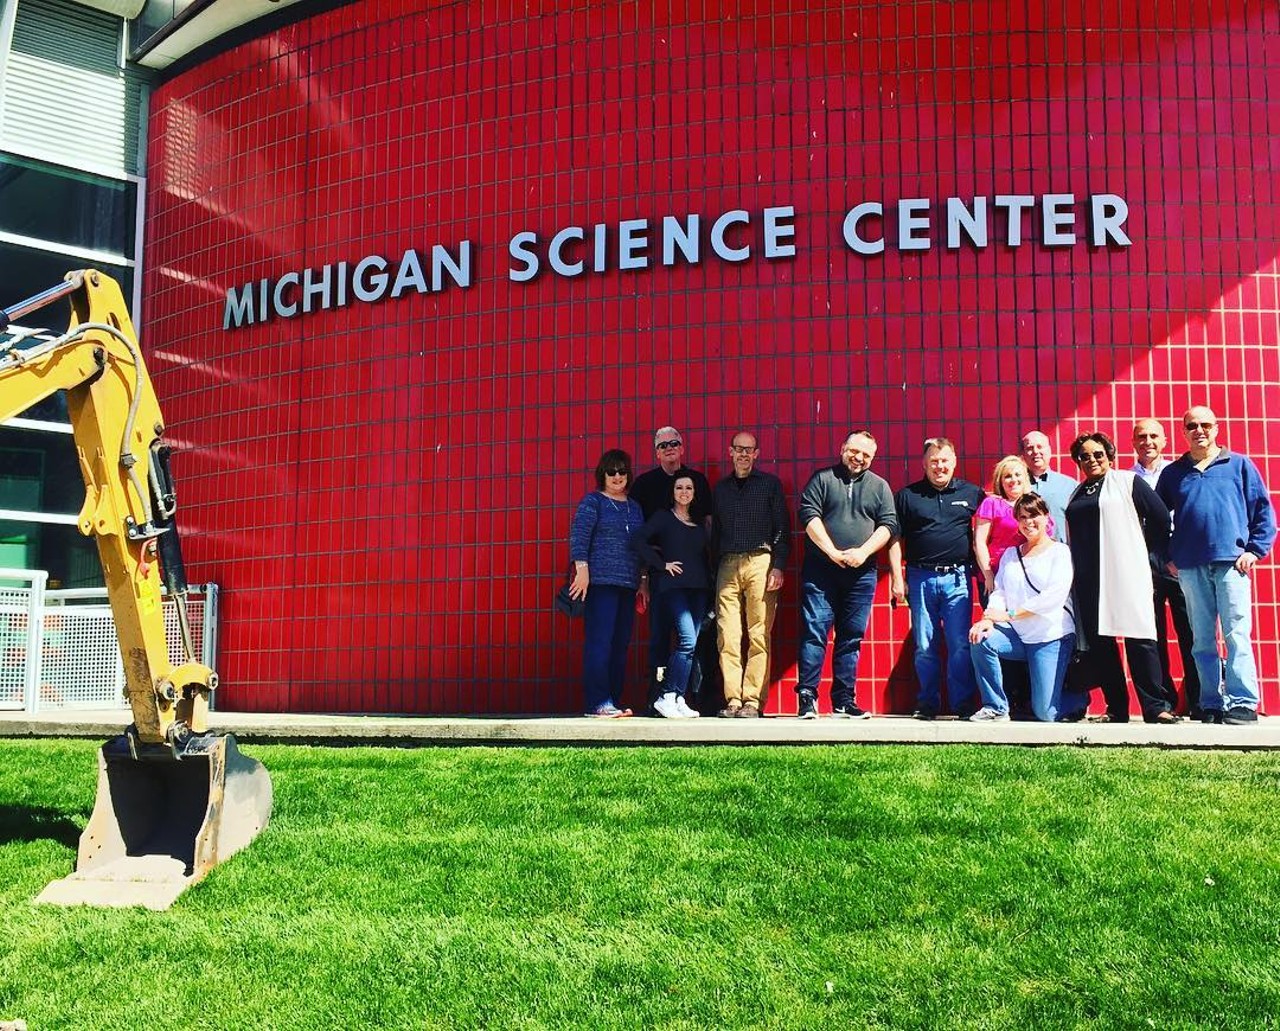 Michigan Science Center
5020 John R St., Detroit; 313-577-8400
The Michigan Science Center wants to inspire creative minds no matter their age. Get the creativity wheels of your visitor spinning with the center&#146;s hands-on exhibits, IMAX theatre, and more.
Photo via Instagram, Michigan Science Center